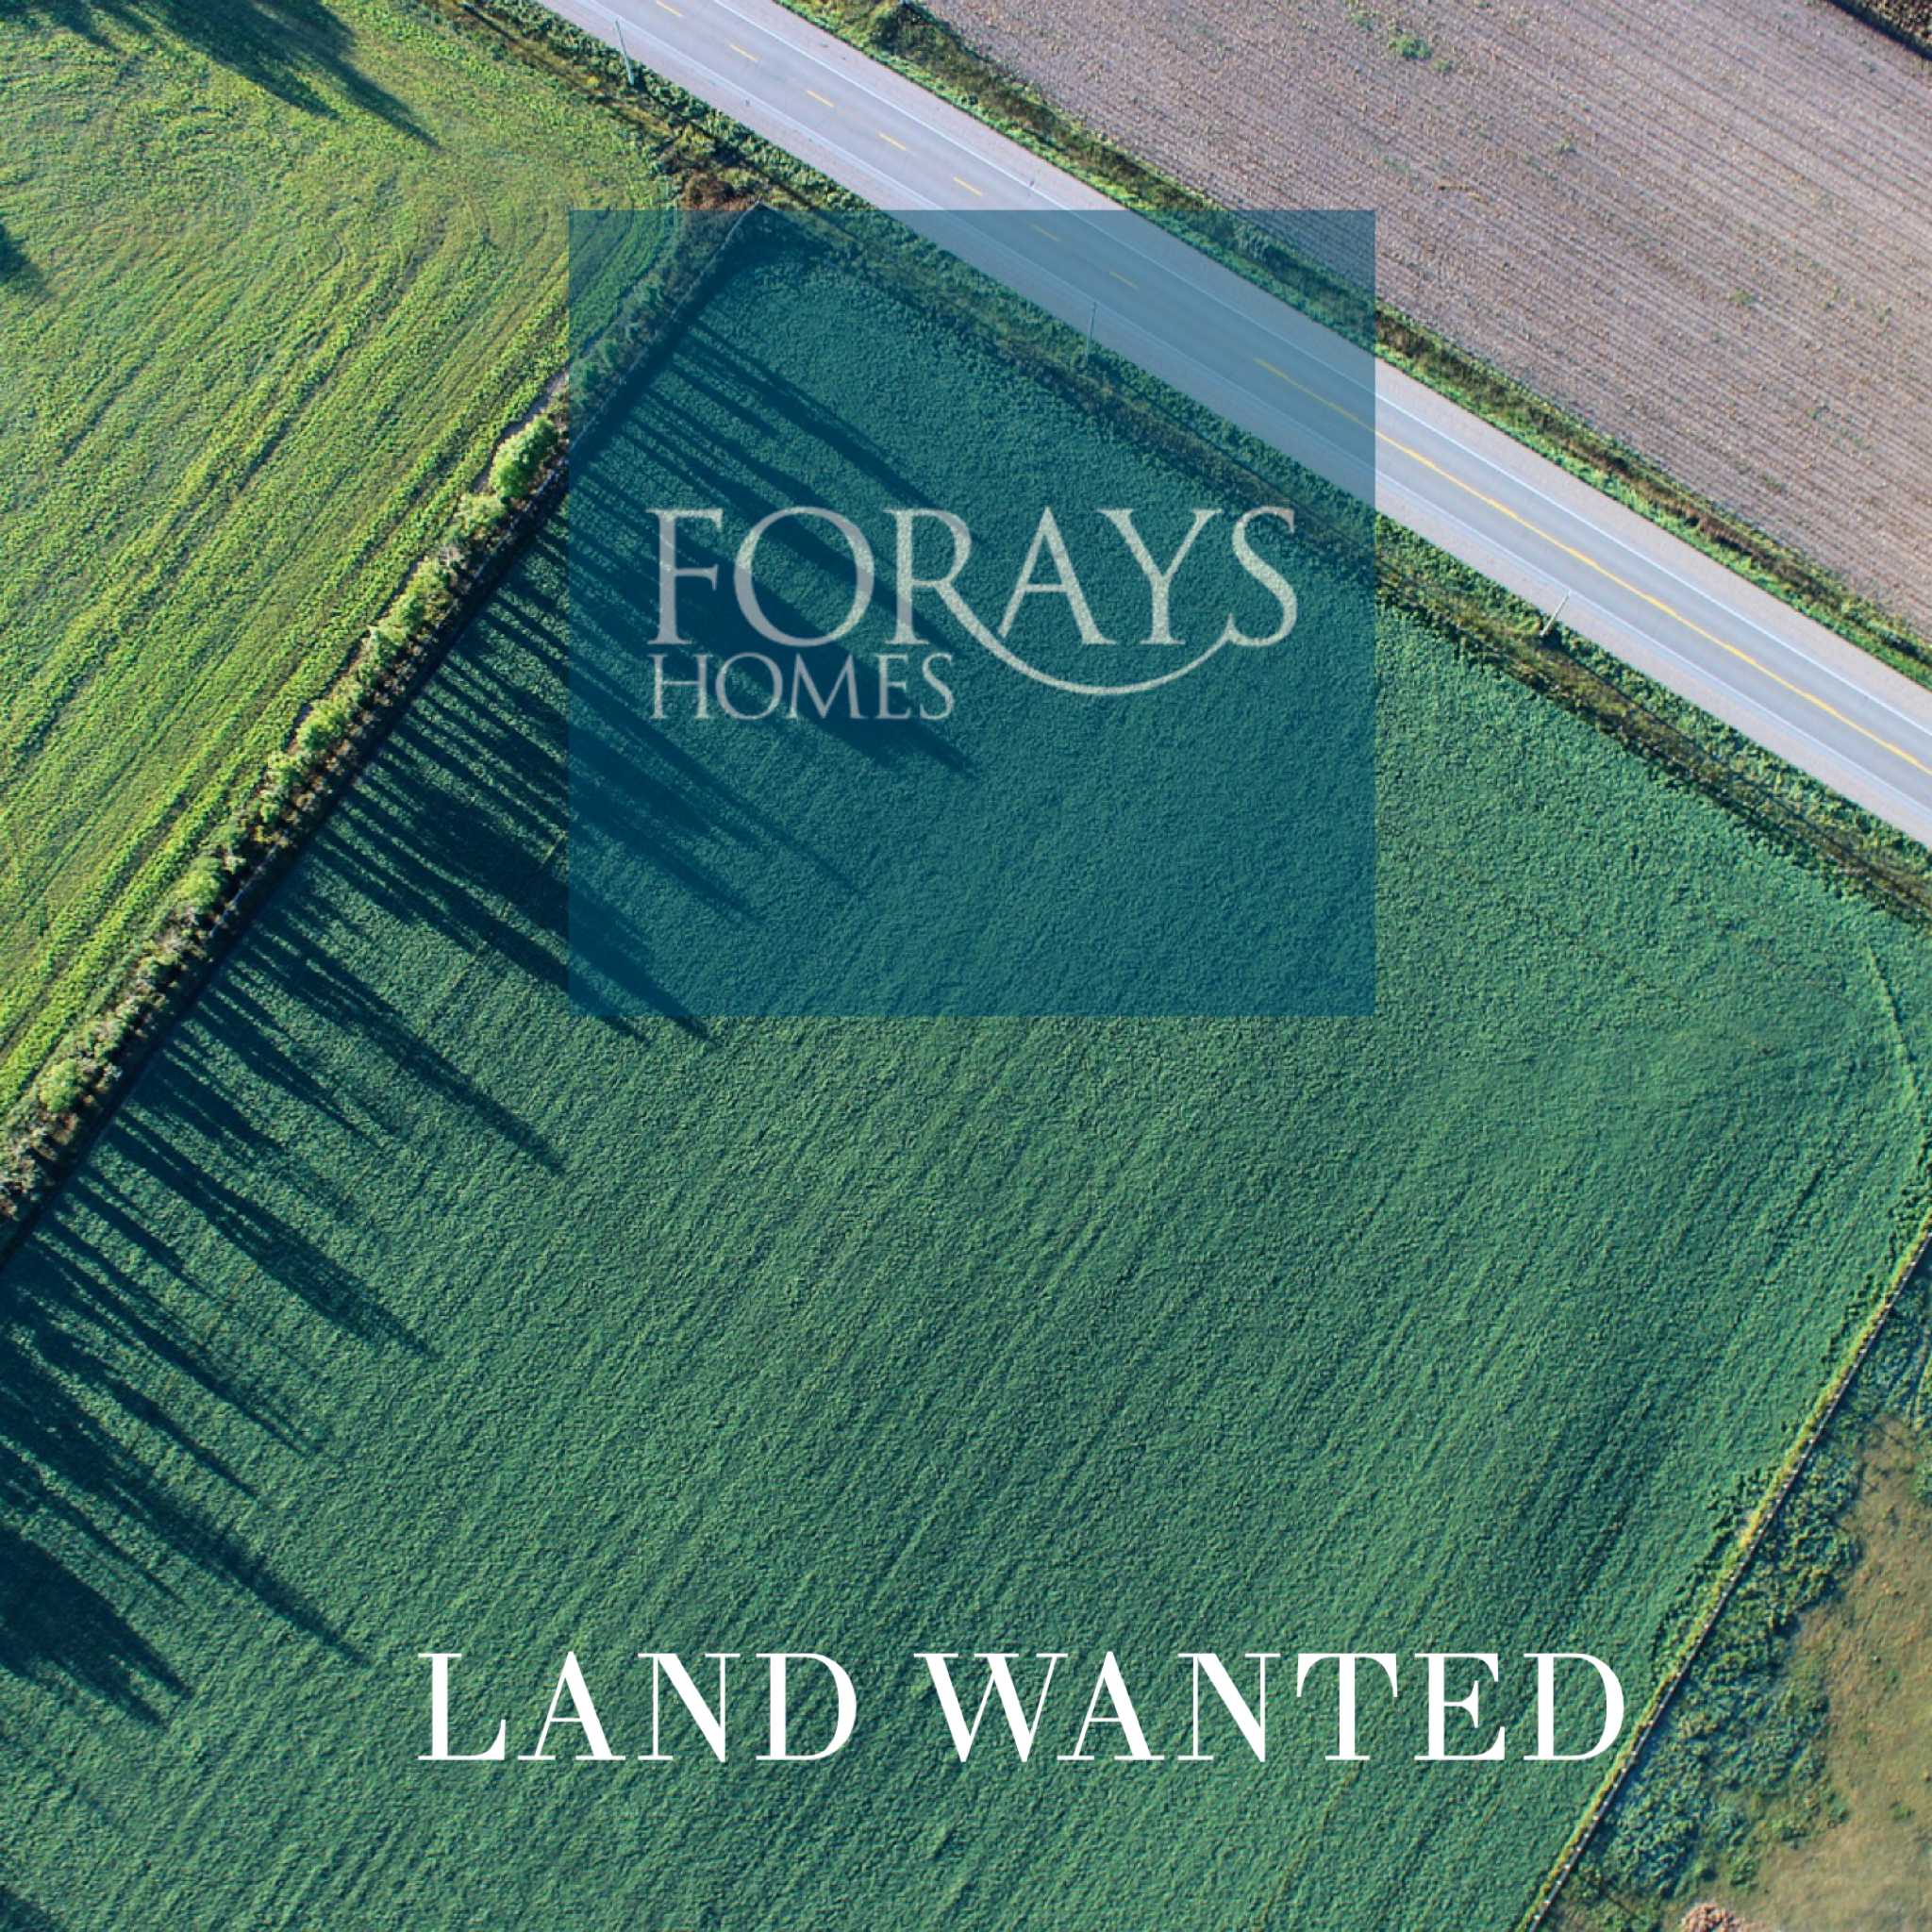 LAND WANTED